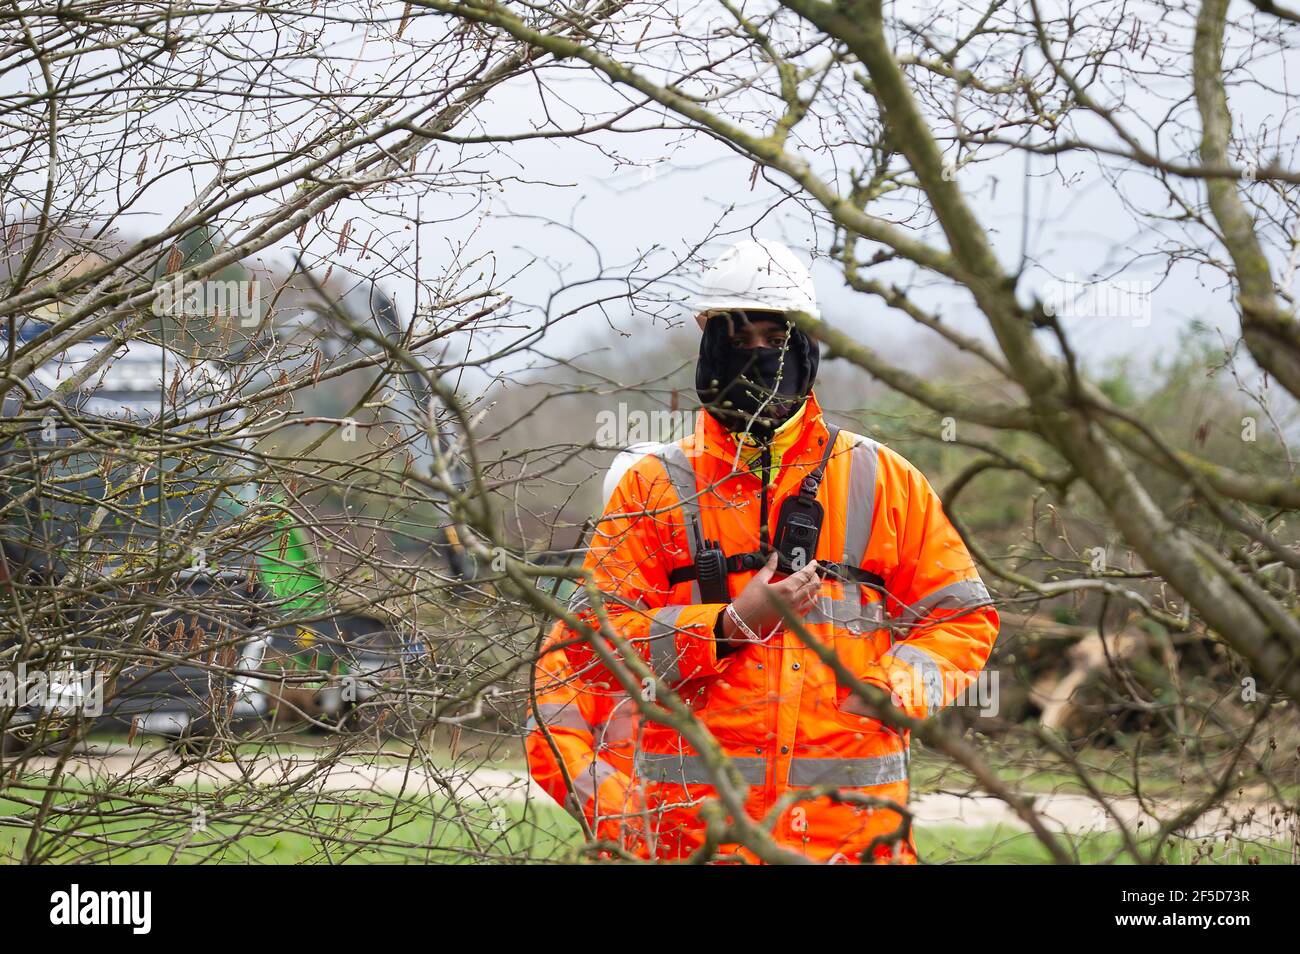 Aylesbury Vale, Buckinghamshire, UK. 24th March, 2021. HS2 have destroyed a huge area of trees and hedgerows off Rocky Lane despite it being bird nesting season. All life forms were being killed by HS2 today as they put the trees and hedgerows through a wood chipper. Three HS2 security guards were harrassing a photographer taking photographs of this destruction from a public highway. The High Speed 2 rail link from London to Birmingham is carving a huge scar across the Chilterns. Credit: Maureen McLean/Alamy Stock Photo